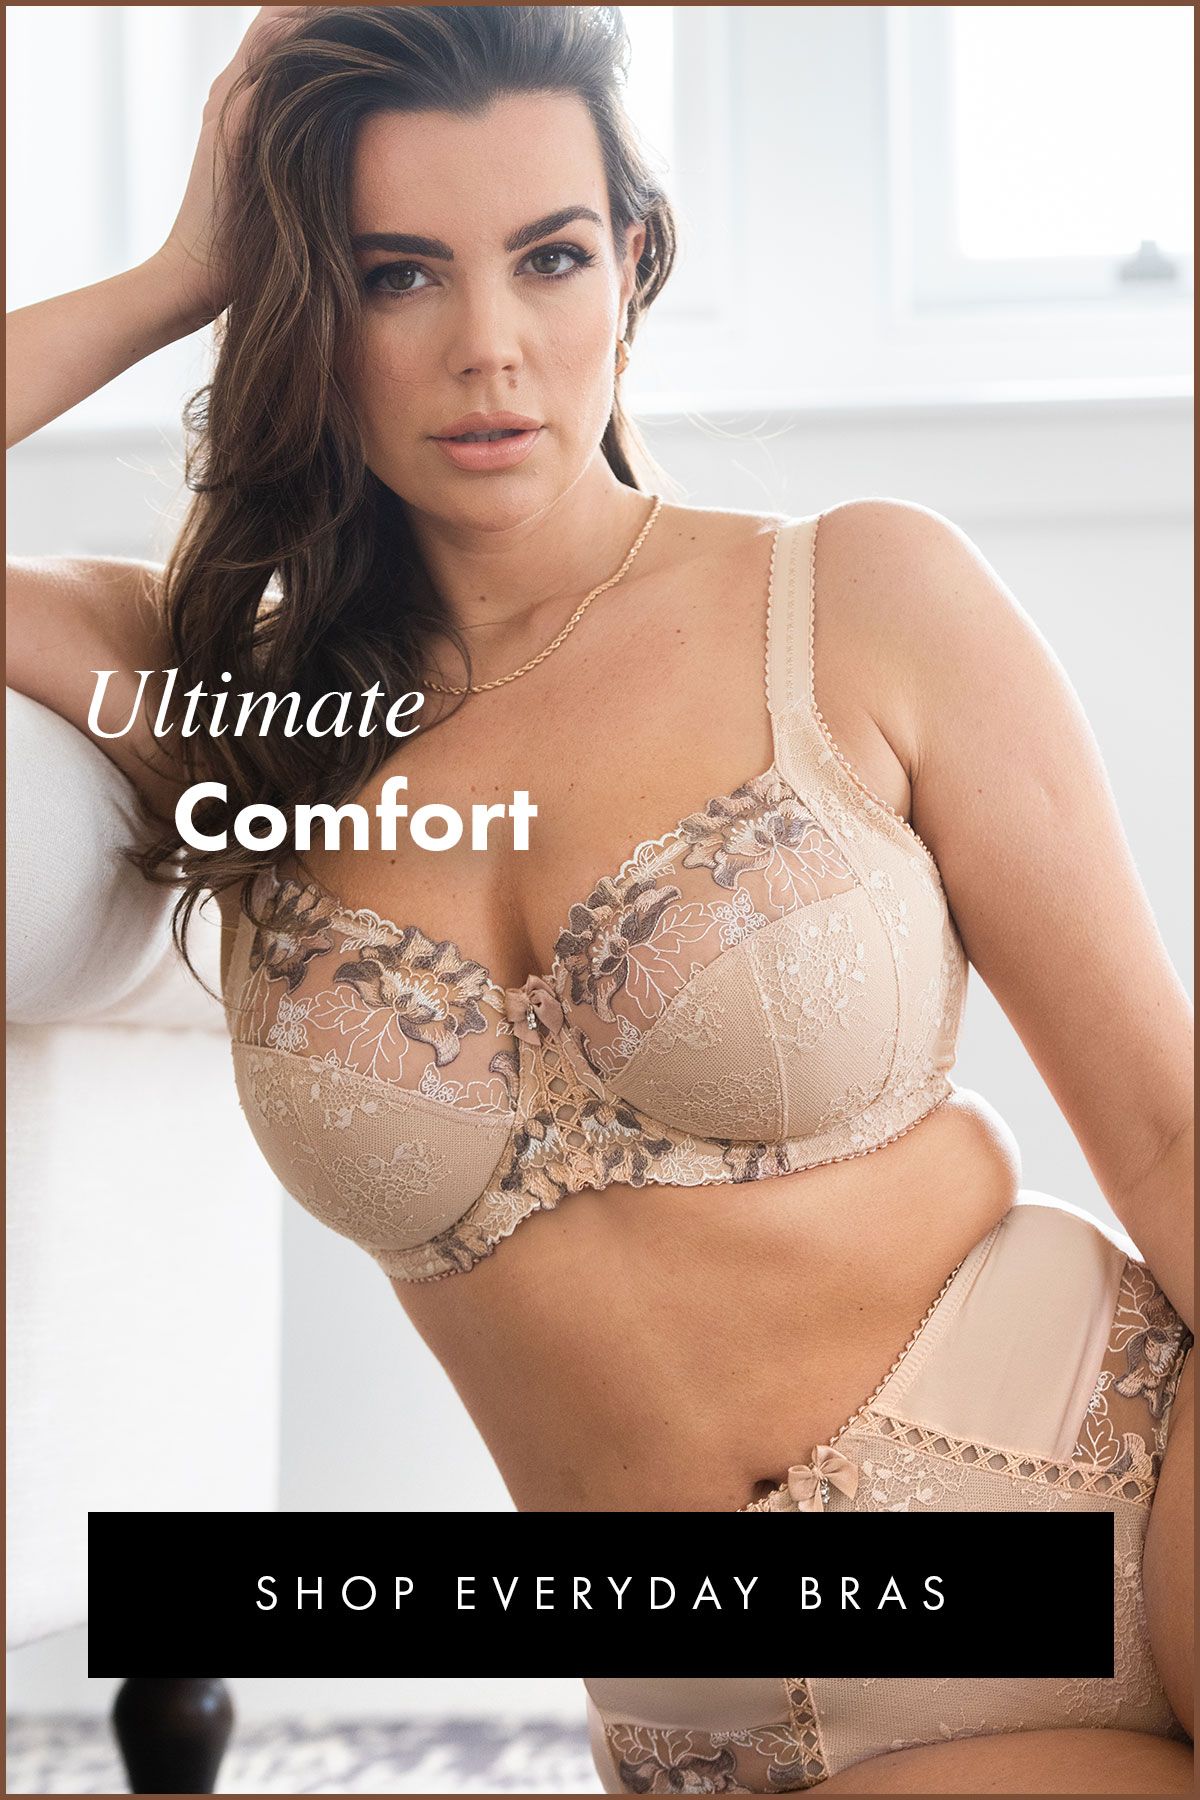 Bra Sizes Up to M Cup